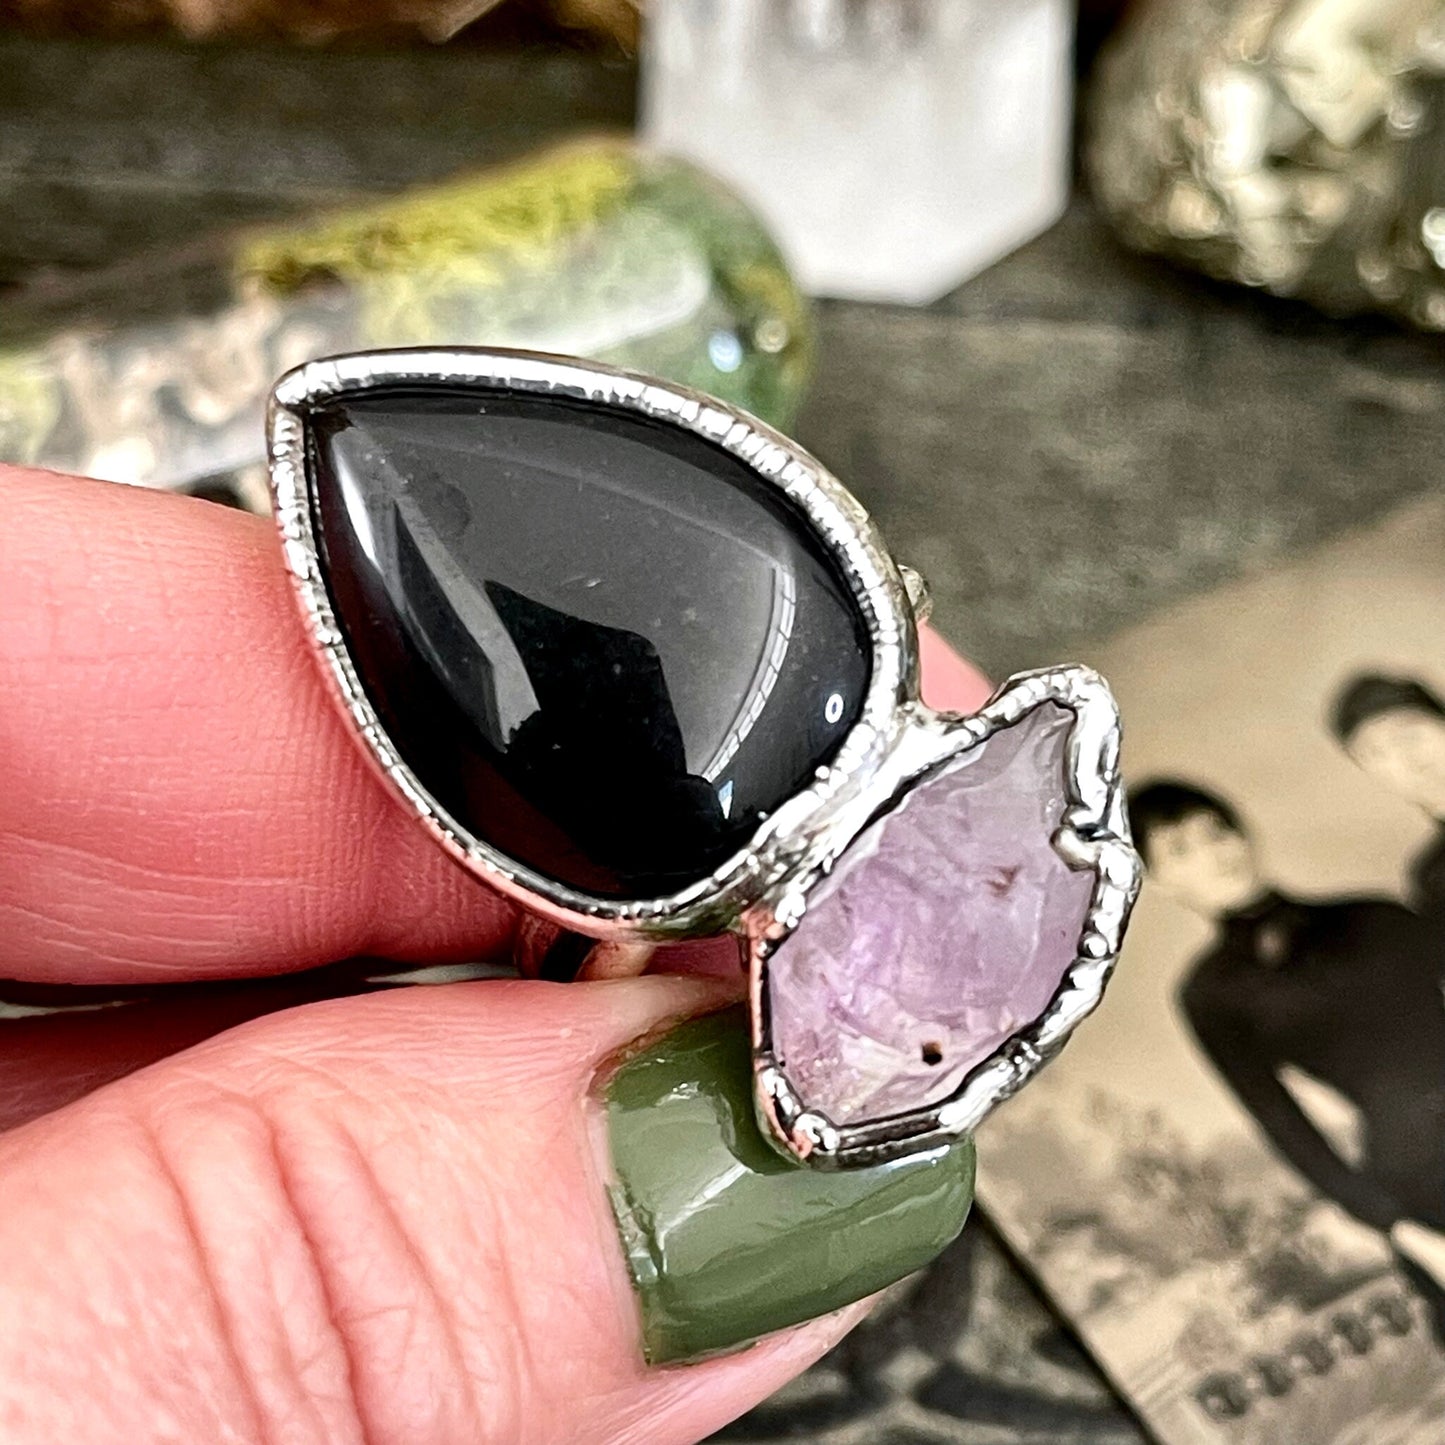 Size 8.5 Two Stone Ring- Black Onyx Purple Raw Amethyst Crystal Ring Fine Silver / Foxlark Collection - One of a Kind / Statement Jewelry